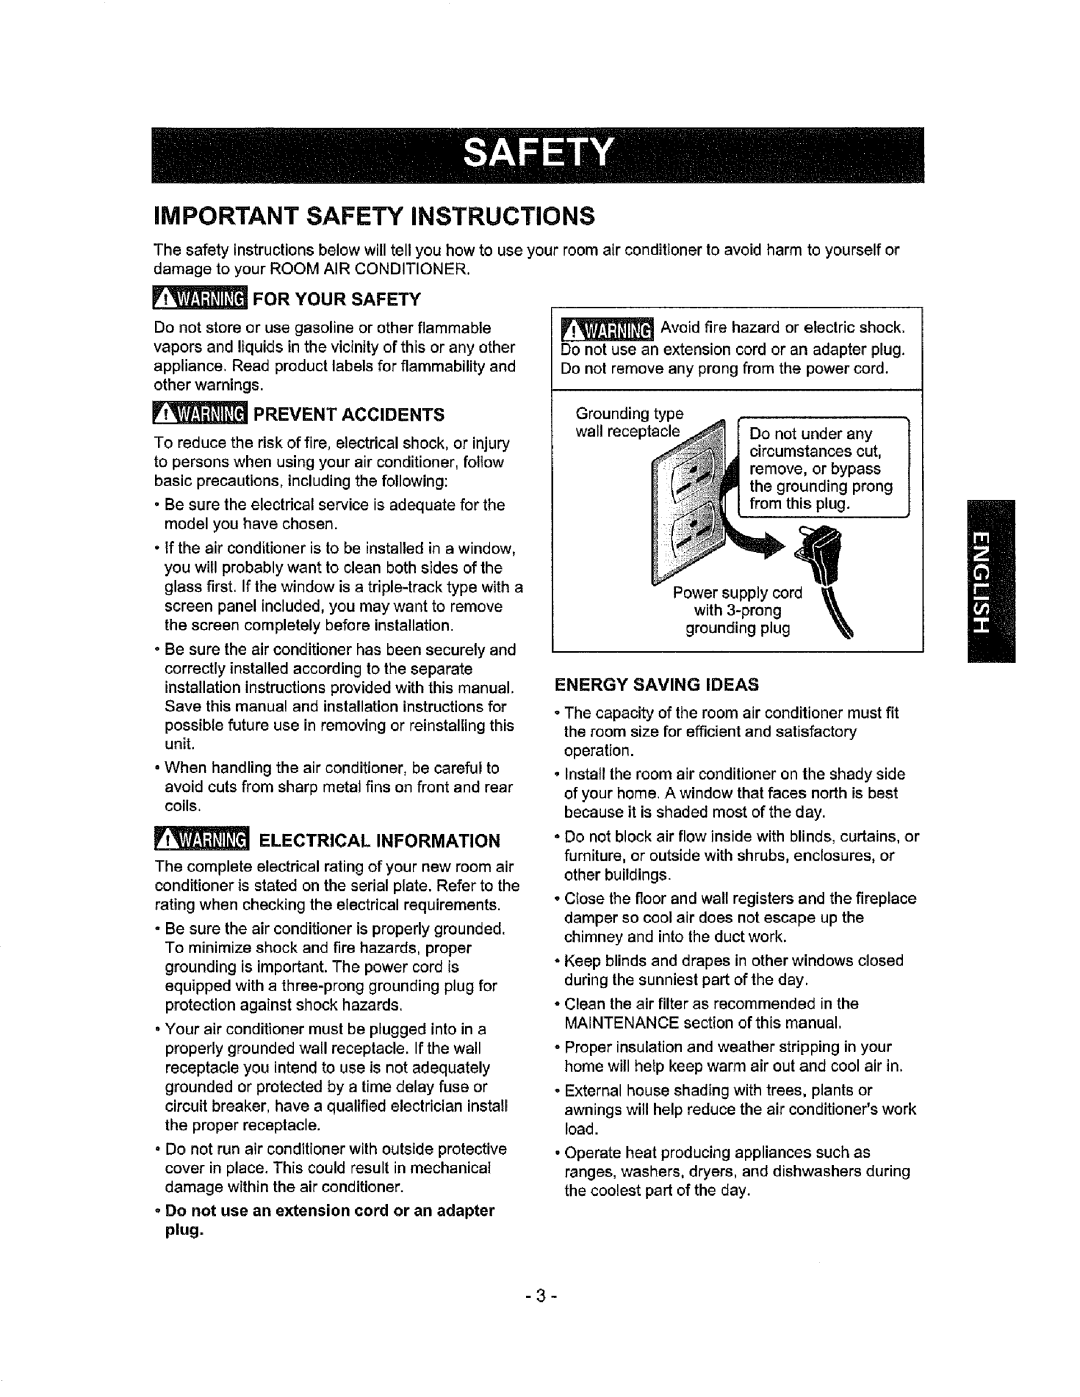 Kenmore 580.72184 owner manual Important Safety Instructions, Grounding type 